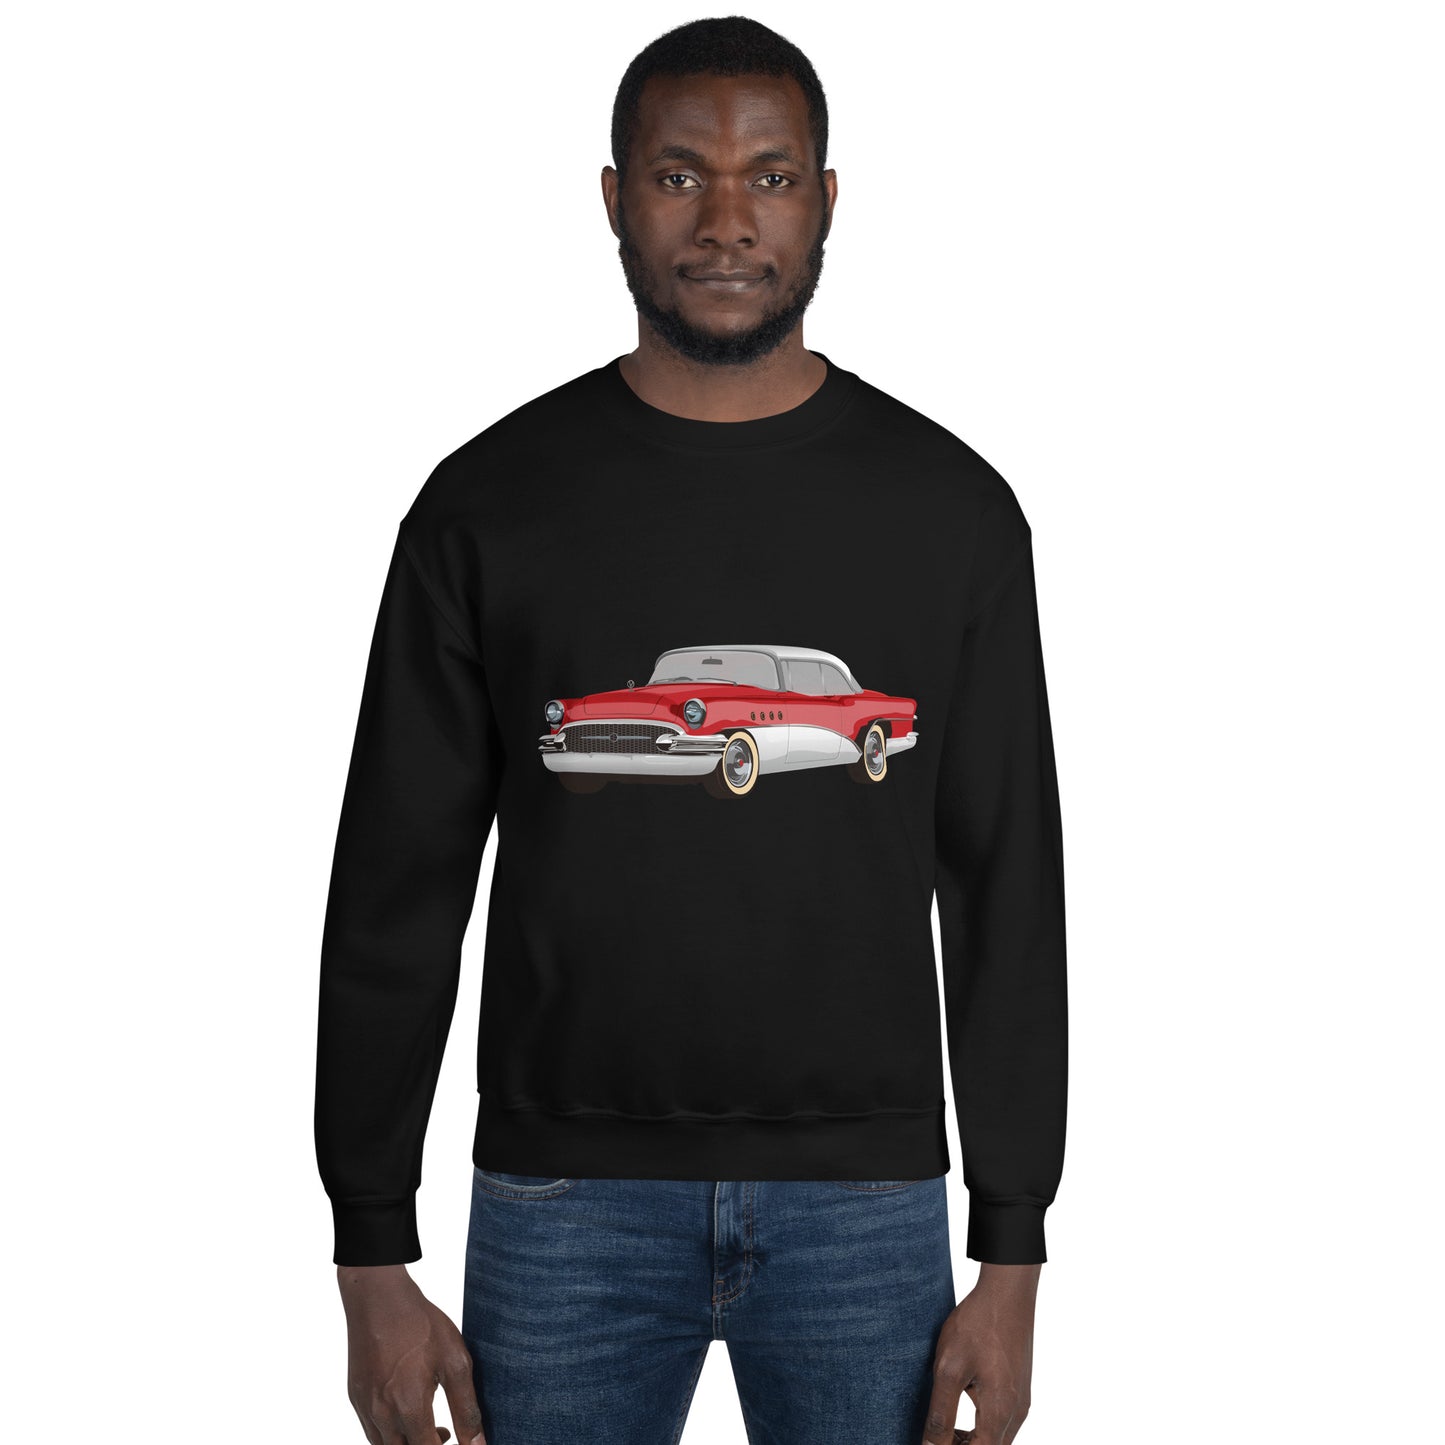 Man with black sweatshirt with red chevrolet